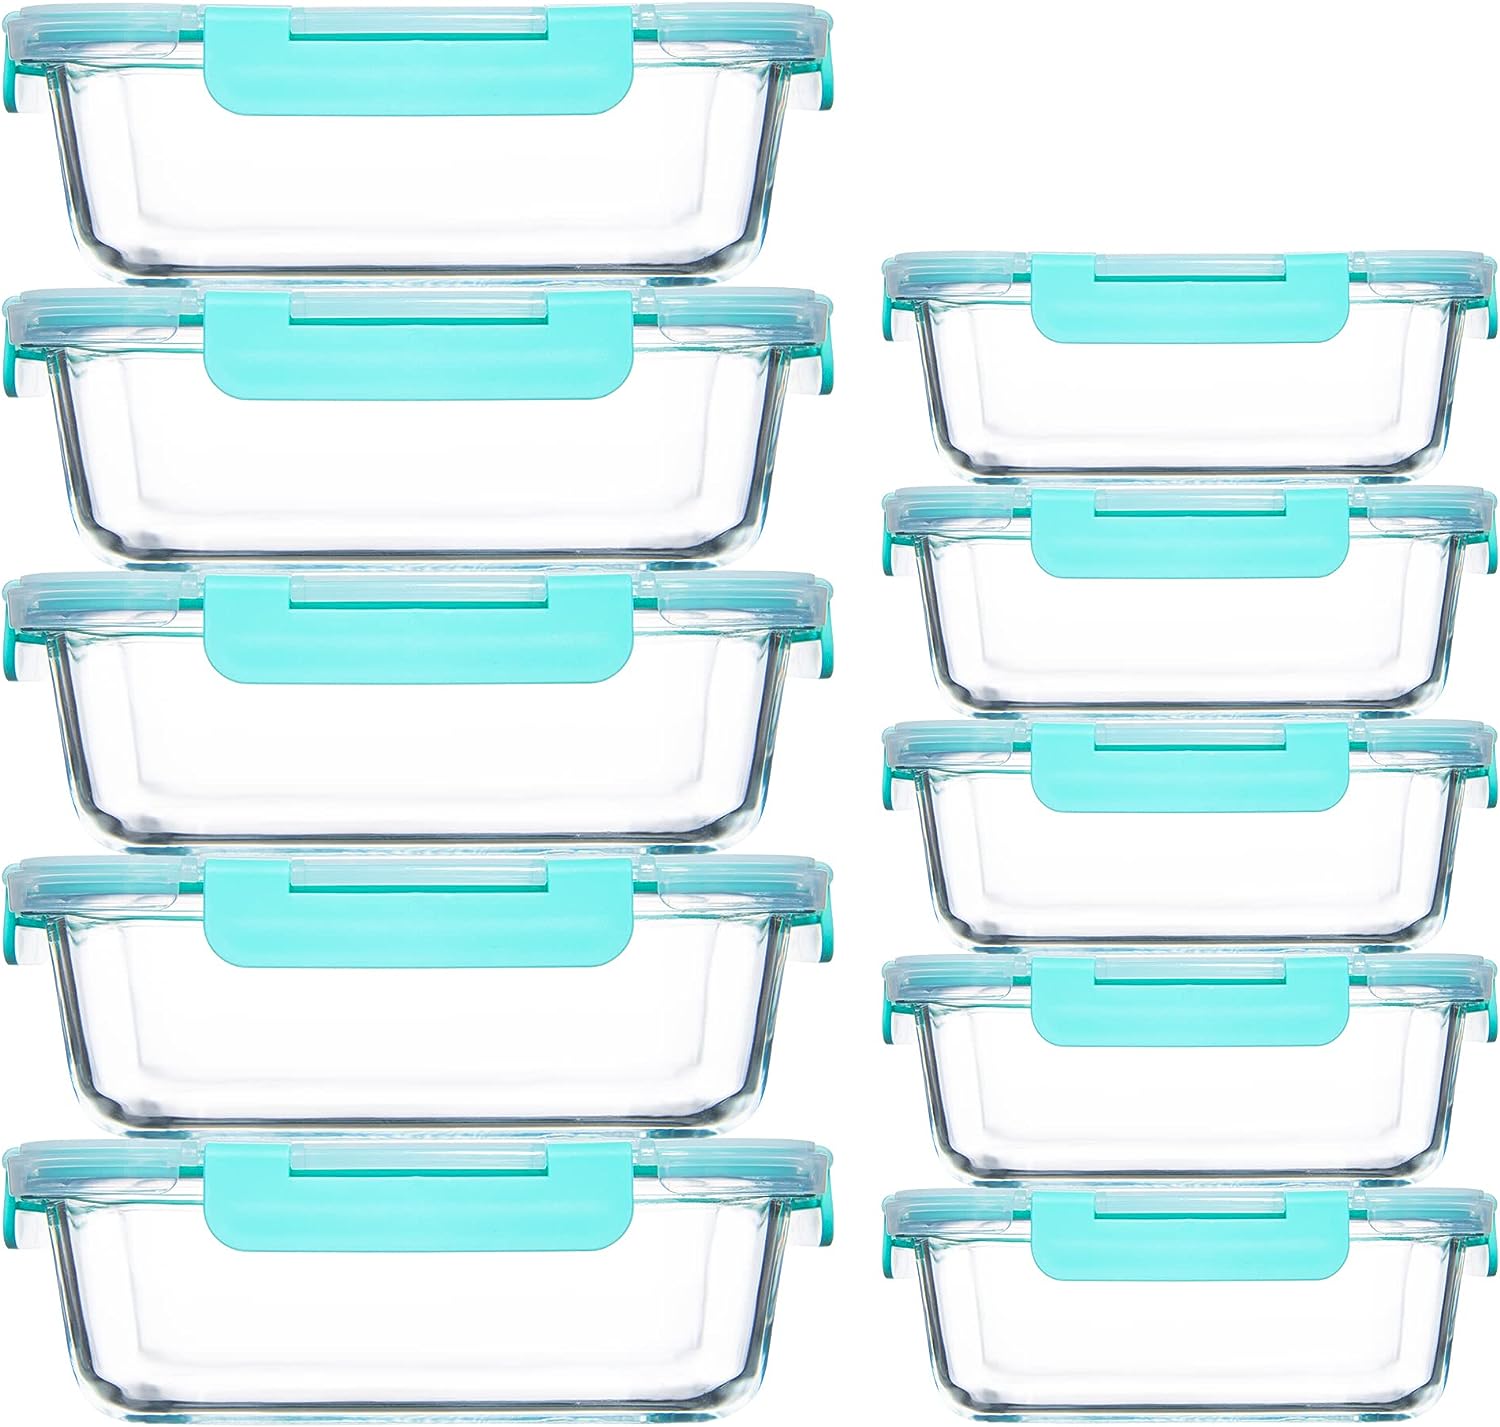 HOMBERKING Large Food Storage Containers with Lids, [12 Piece] Glass Meal  Prep Containers, Airtight Glass Bento Boxes, BPA Free & Leak Proof (6lids 